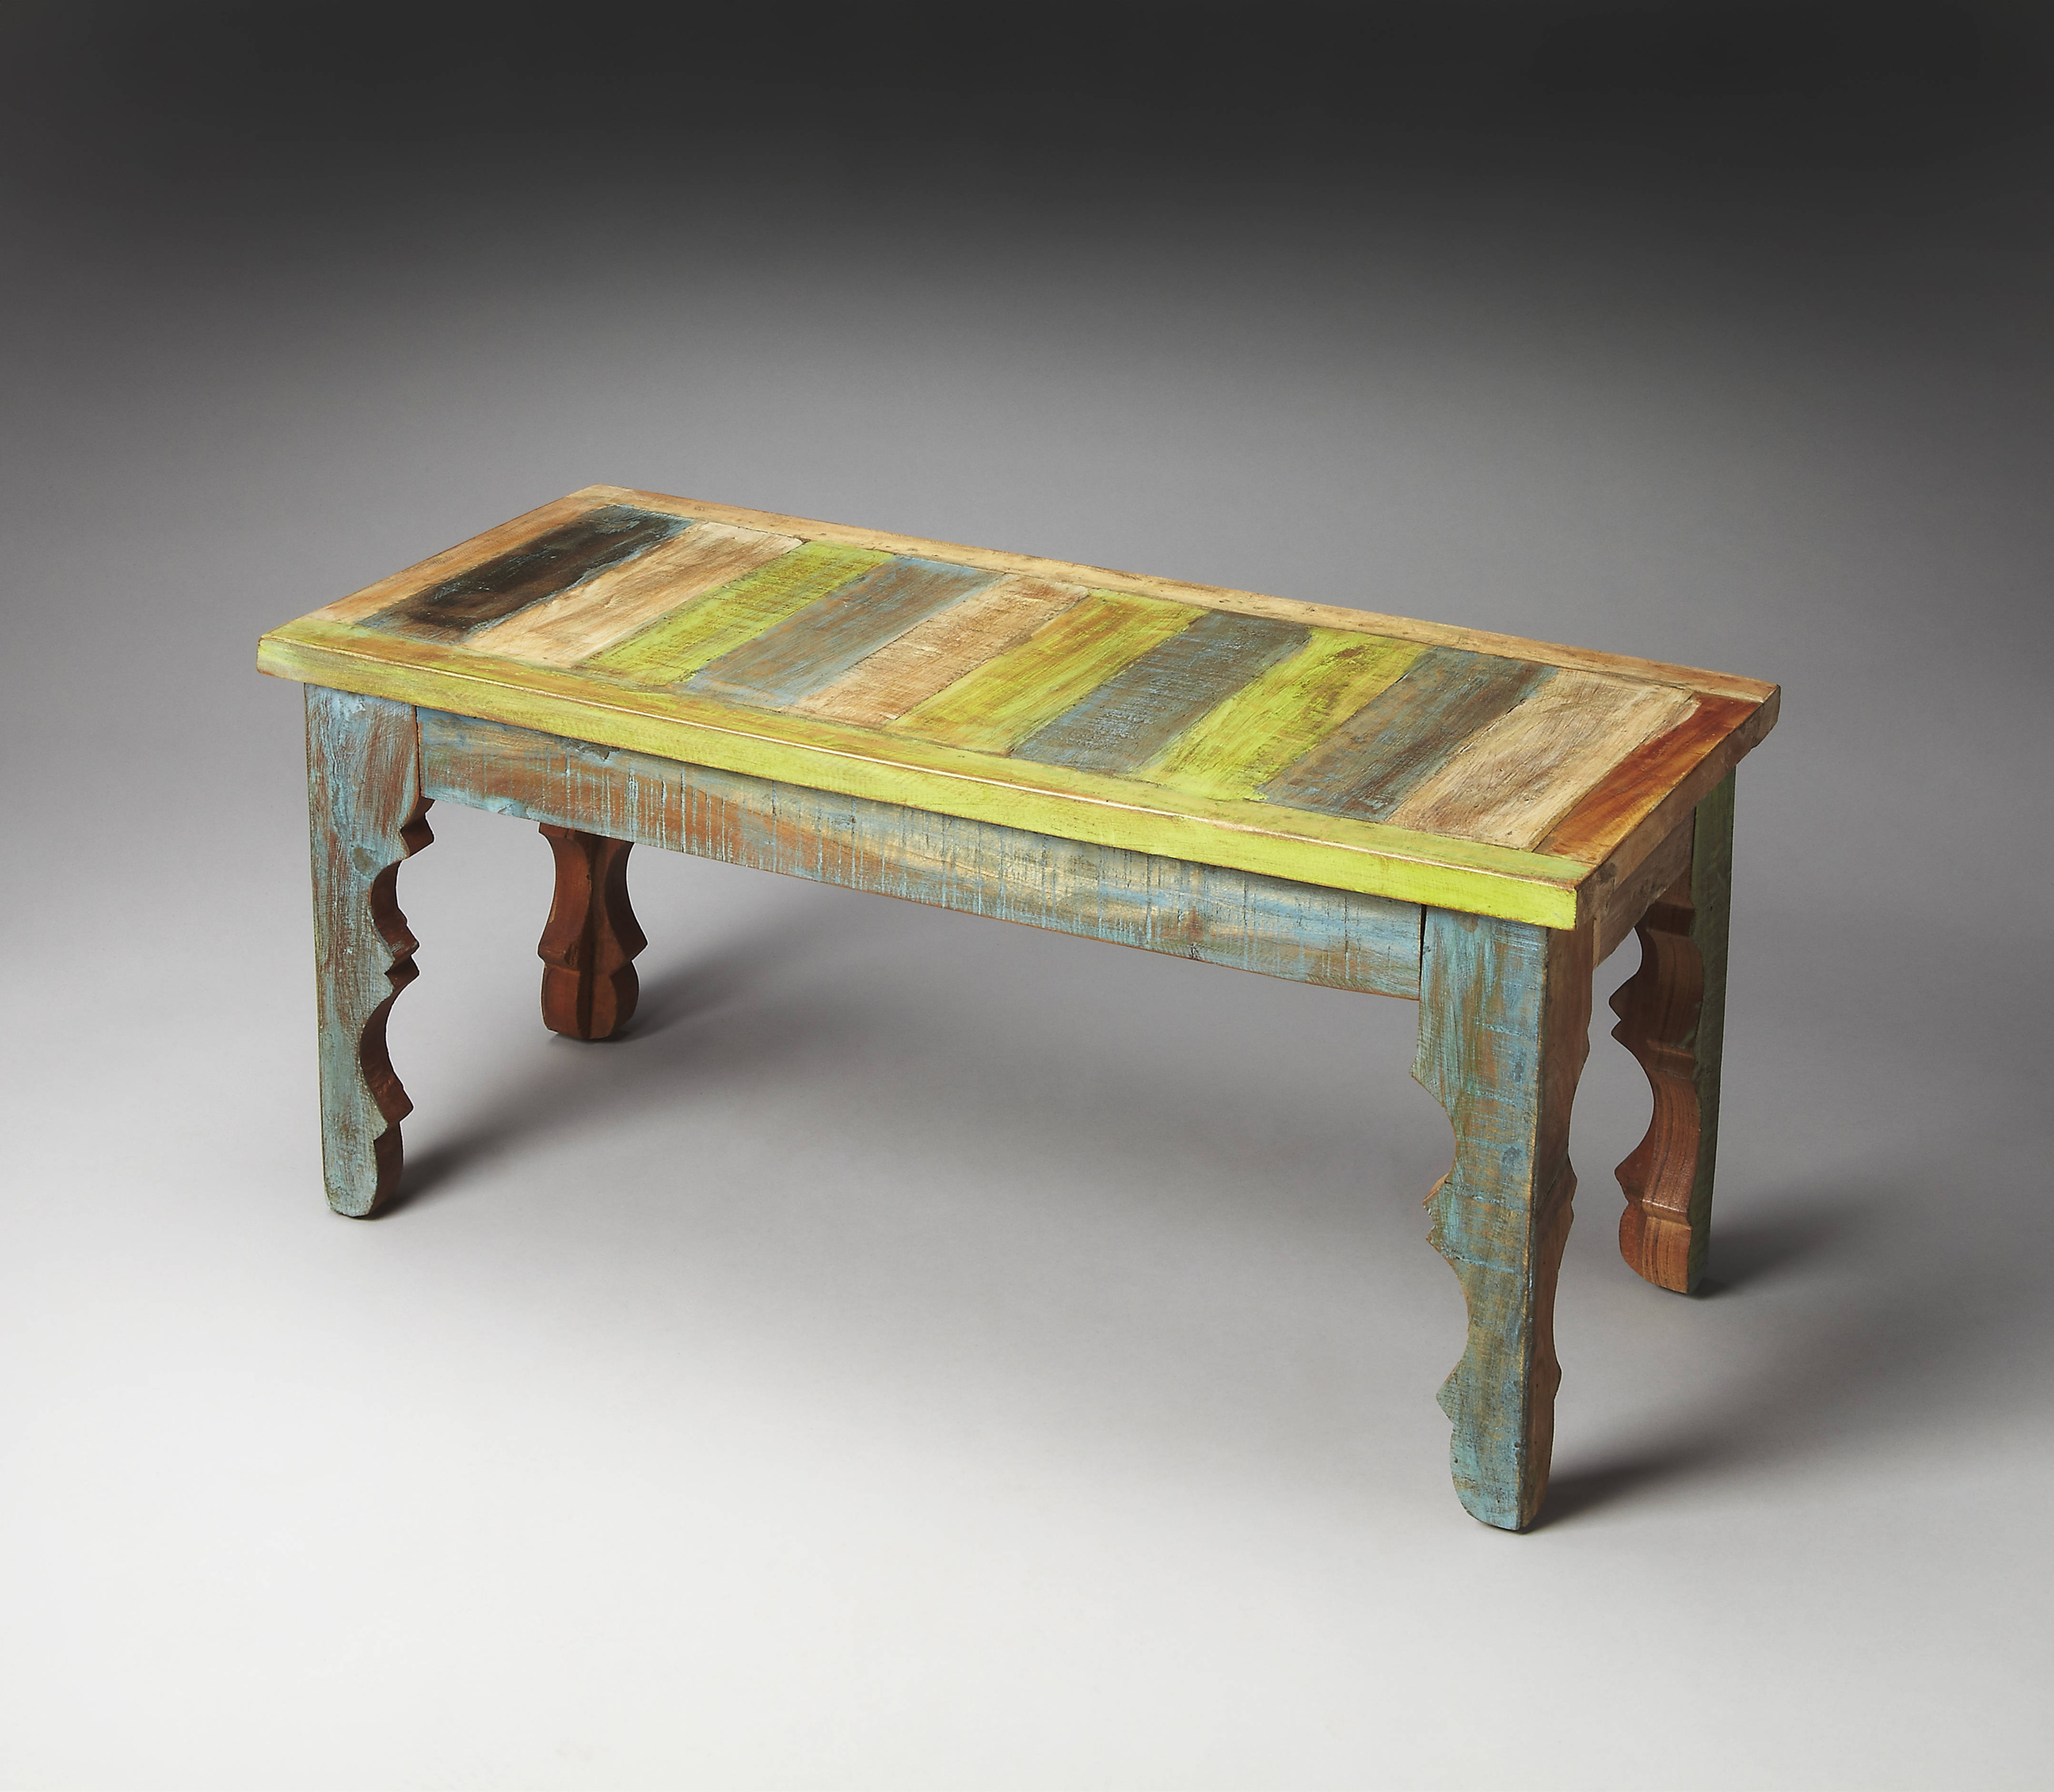 Butler Rao Painted Wood Bench